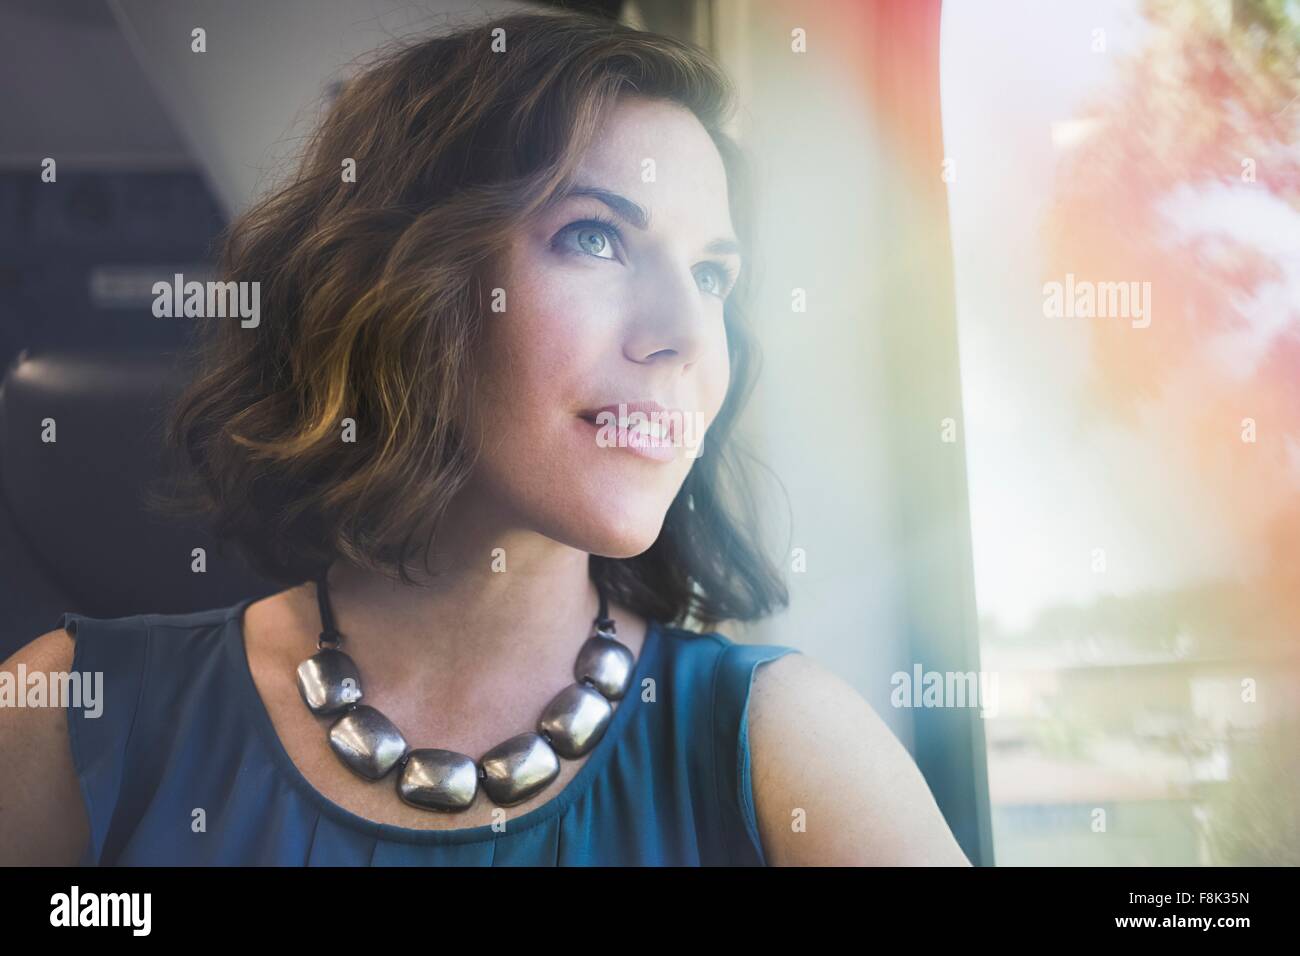 Mid adult woman on train, looking out of window Stock Photo